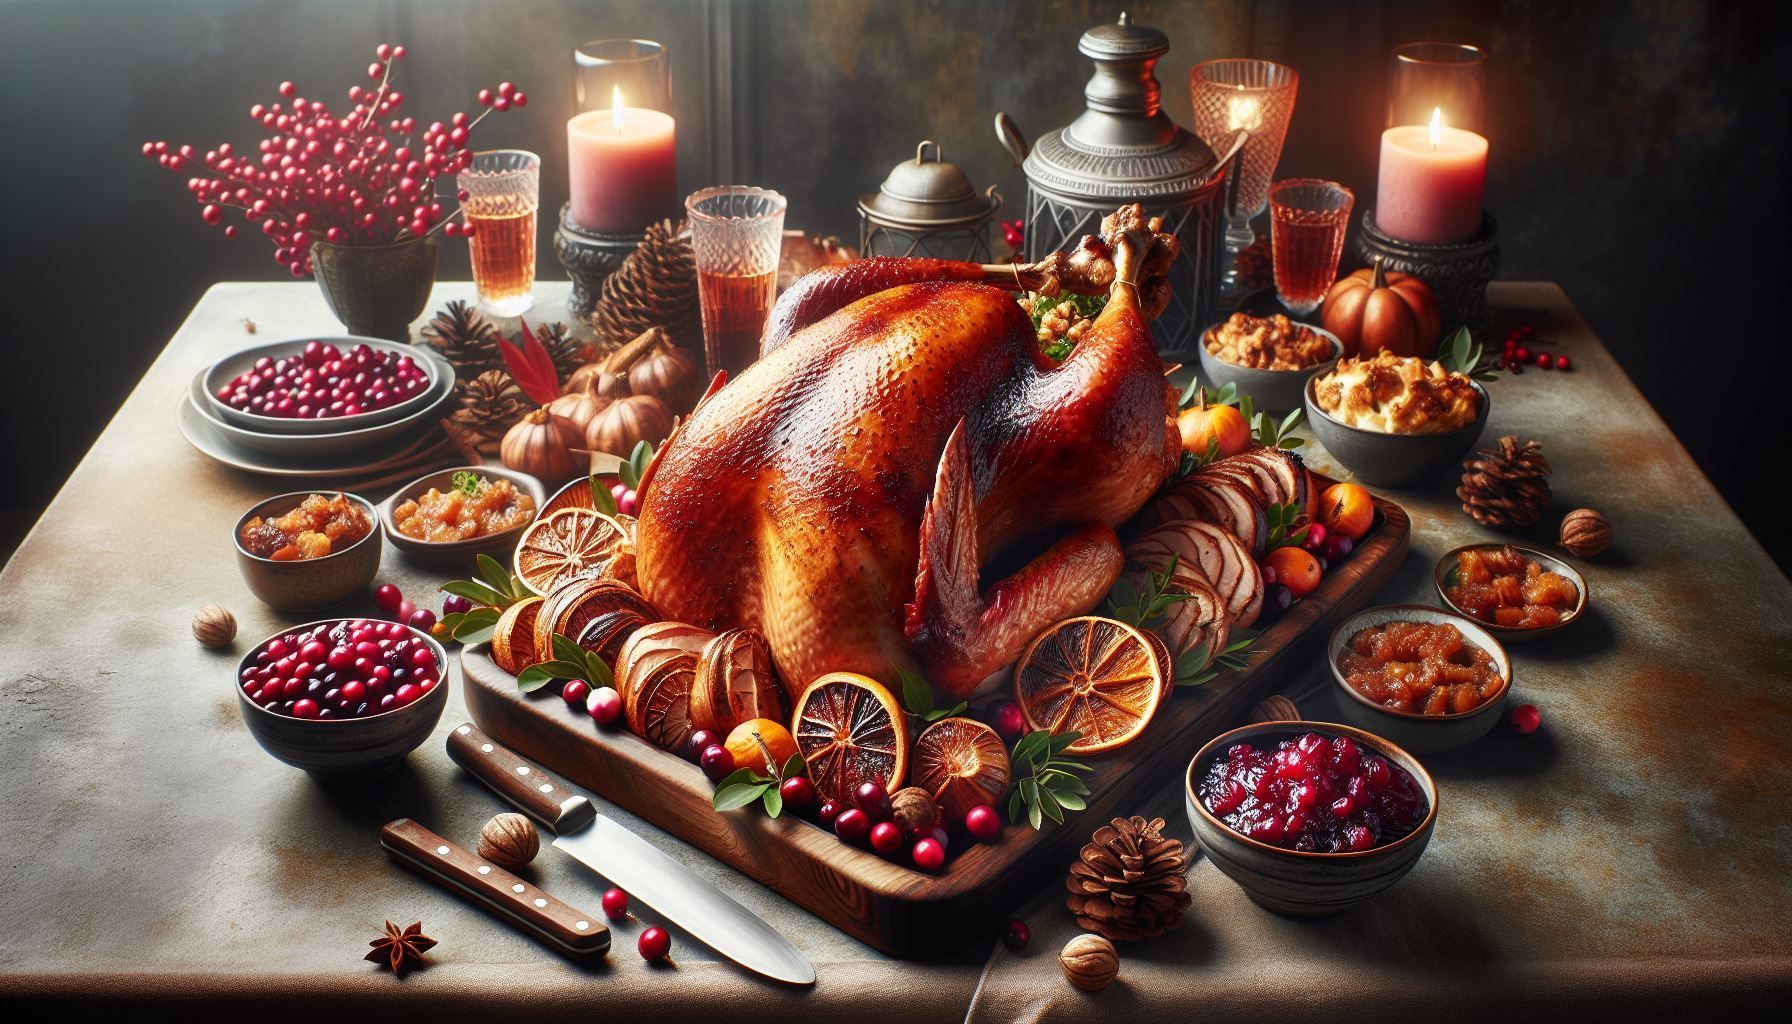 A roasted turkey is sitting on top of a wooden cutting board on a table.